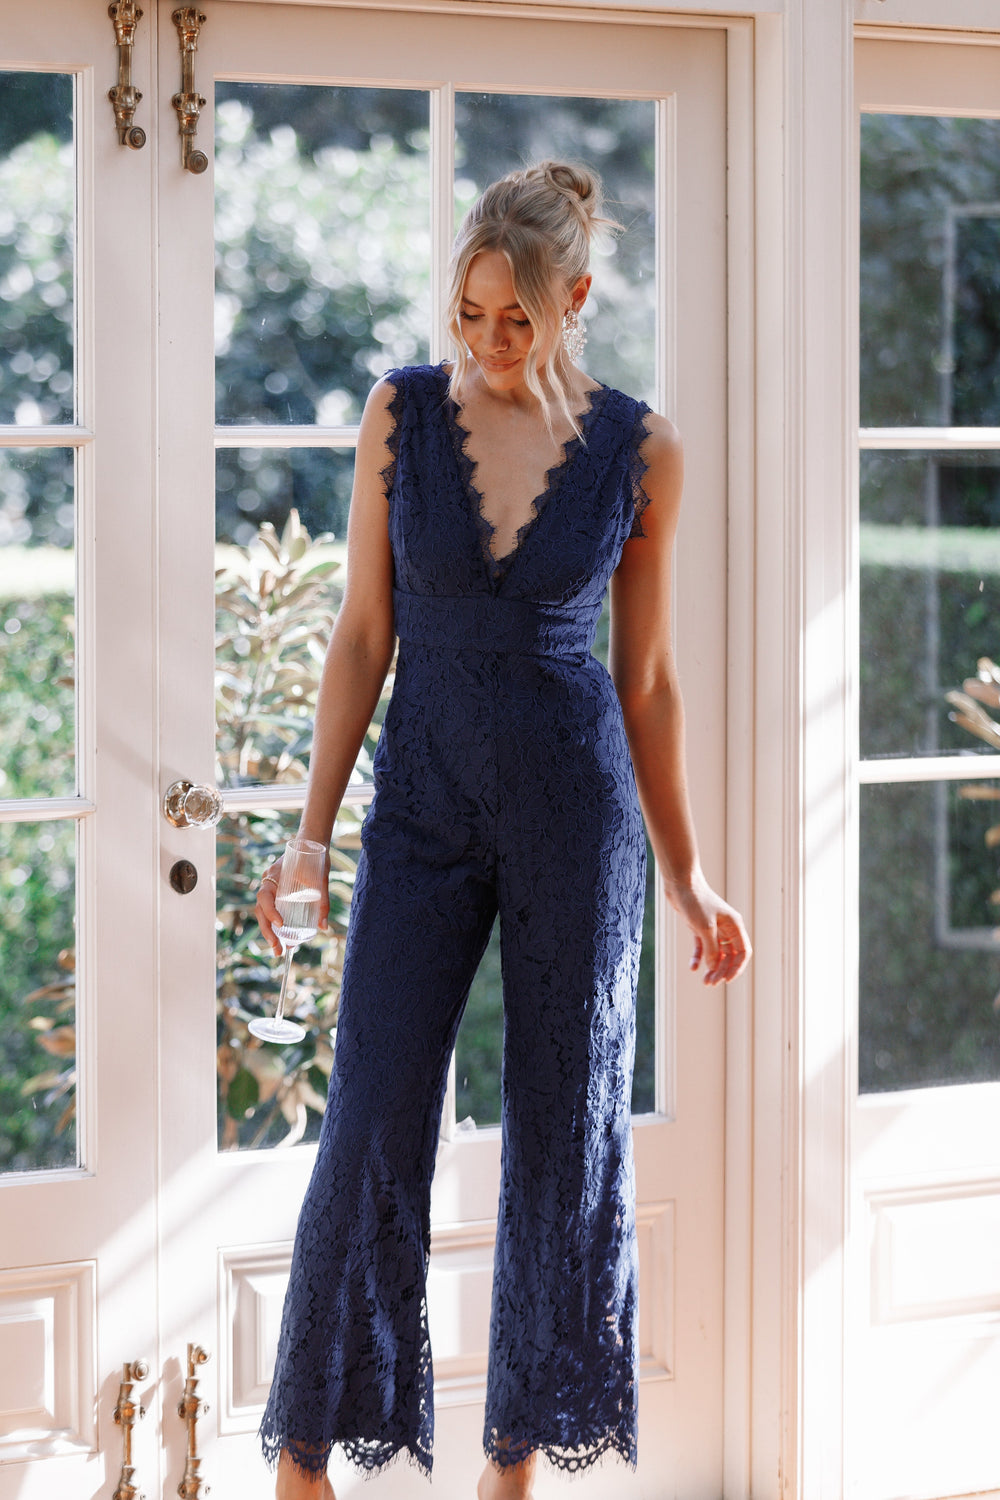 Petal and Pup USA Rompers Eloise Lace Jumpsuit - Navy